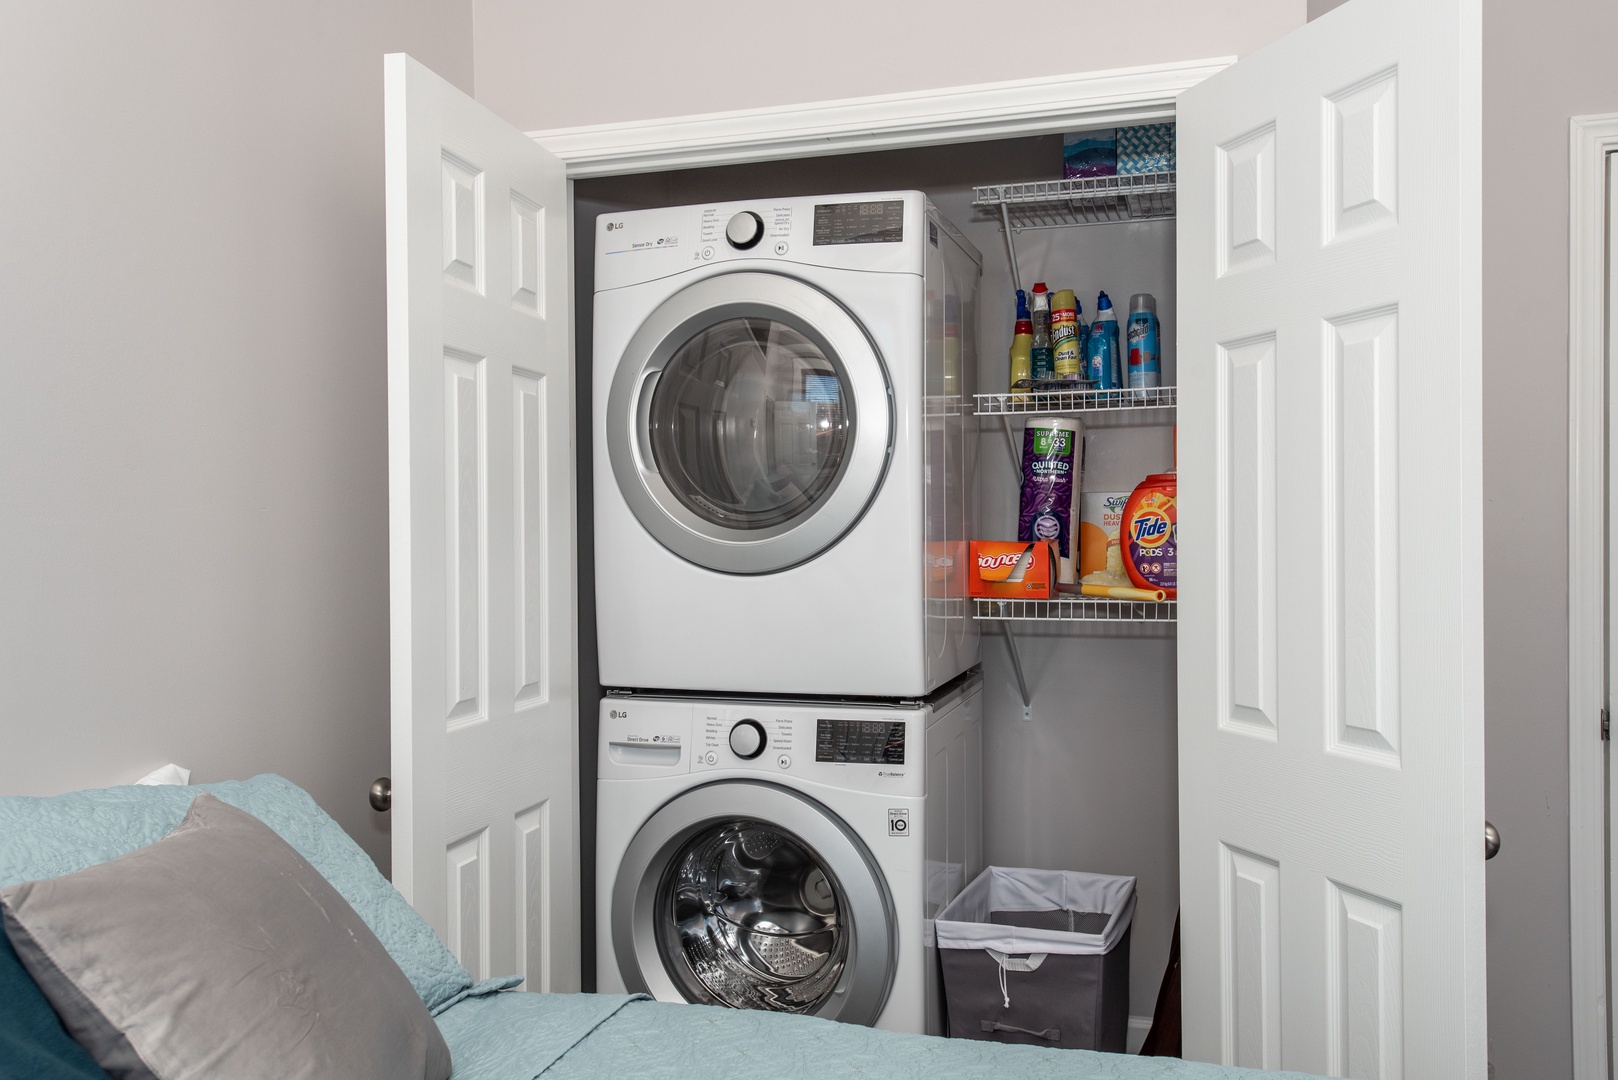 Apt 1 – Private laundry is available for your stay, tucked away in the bedroom